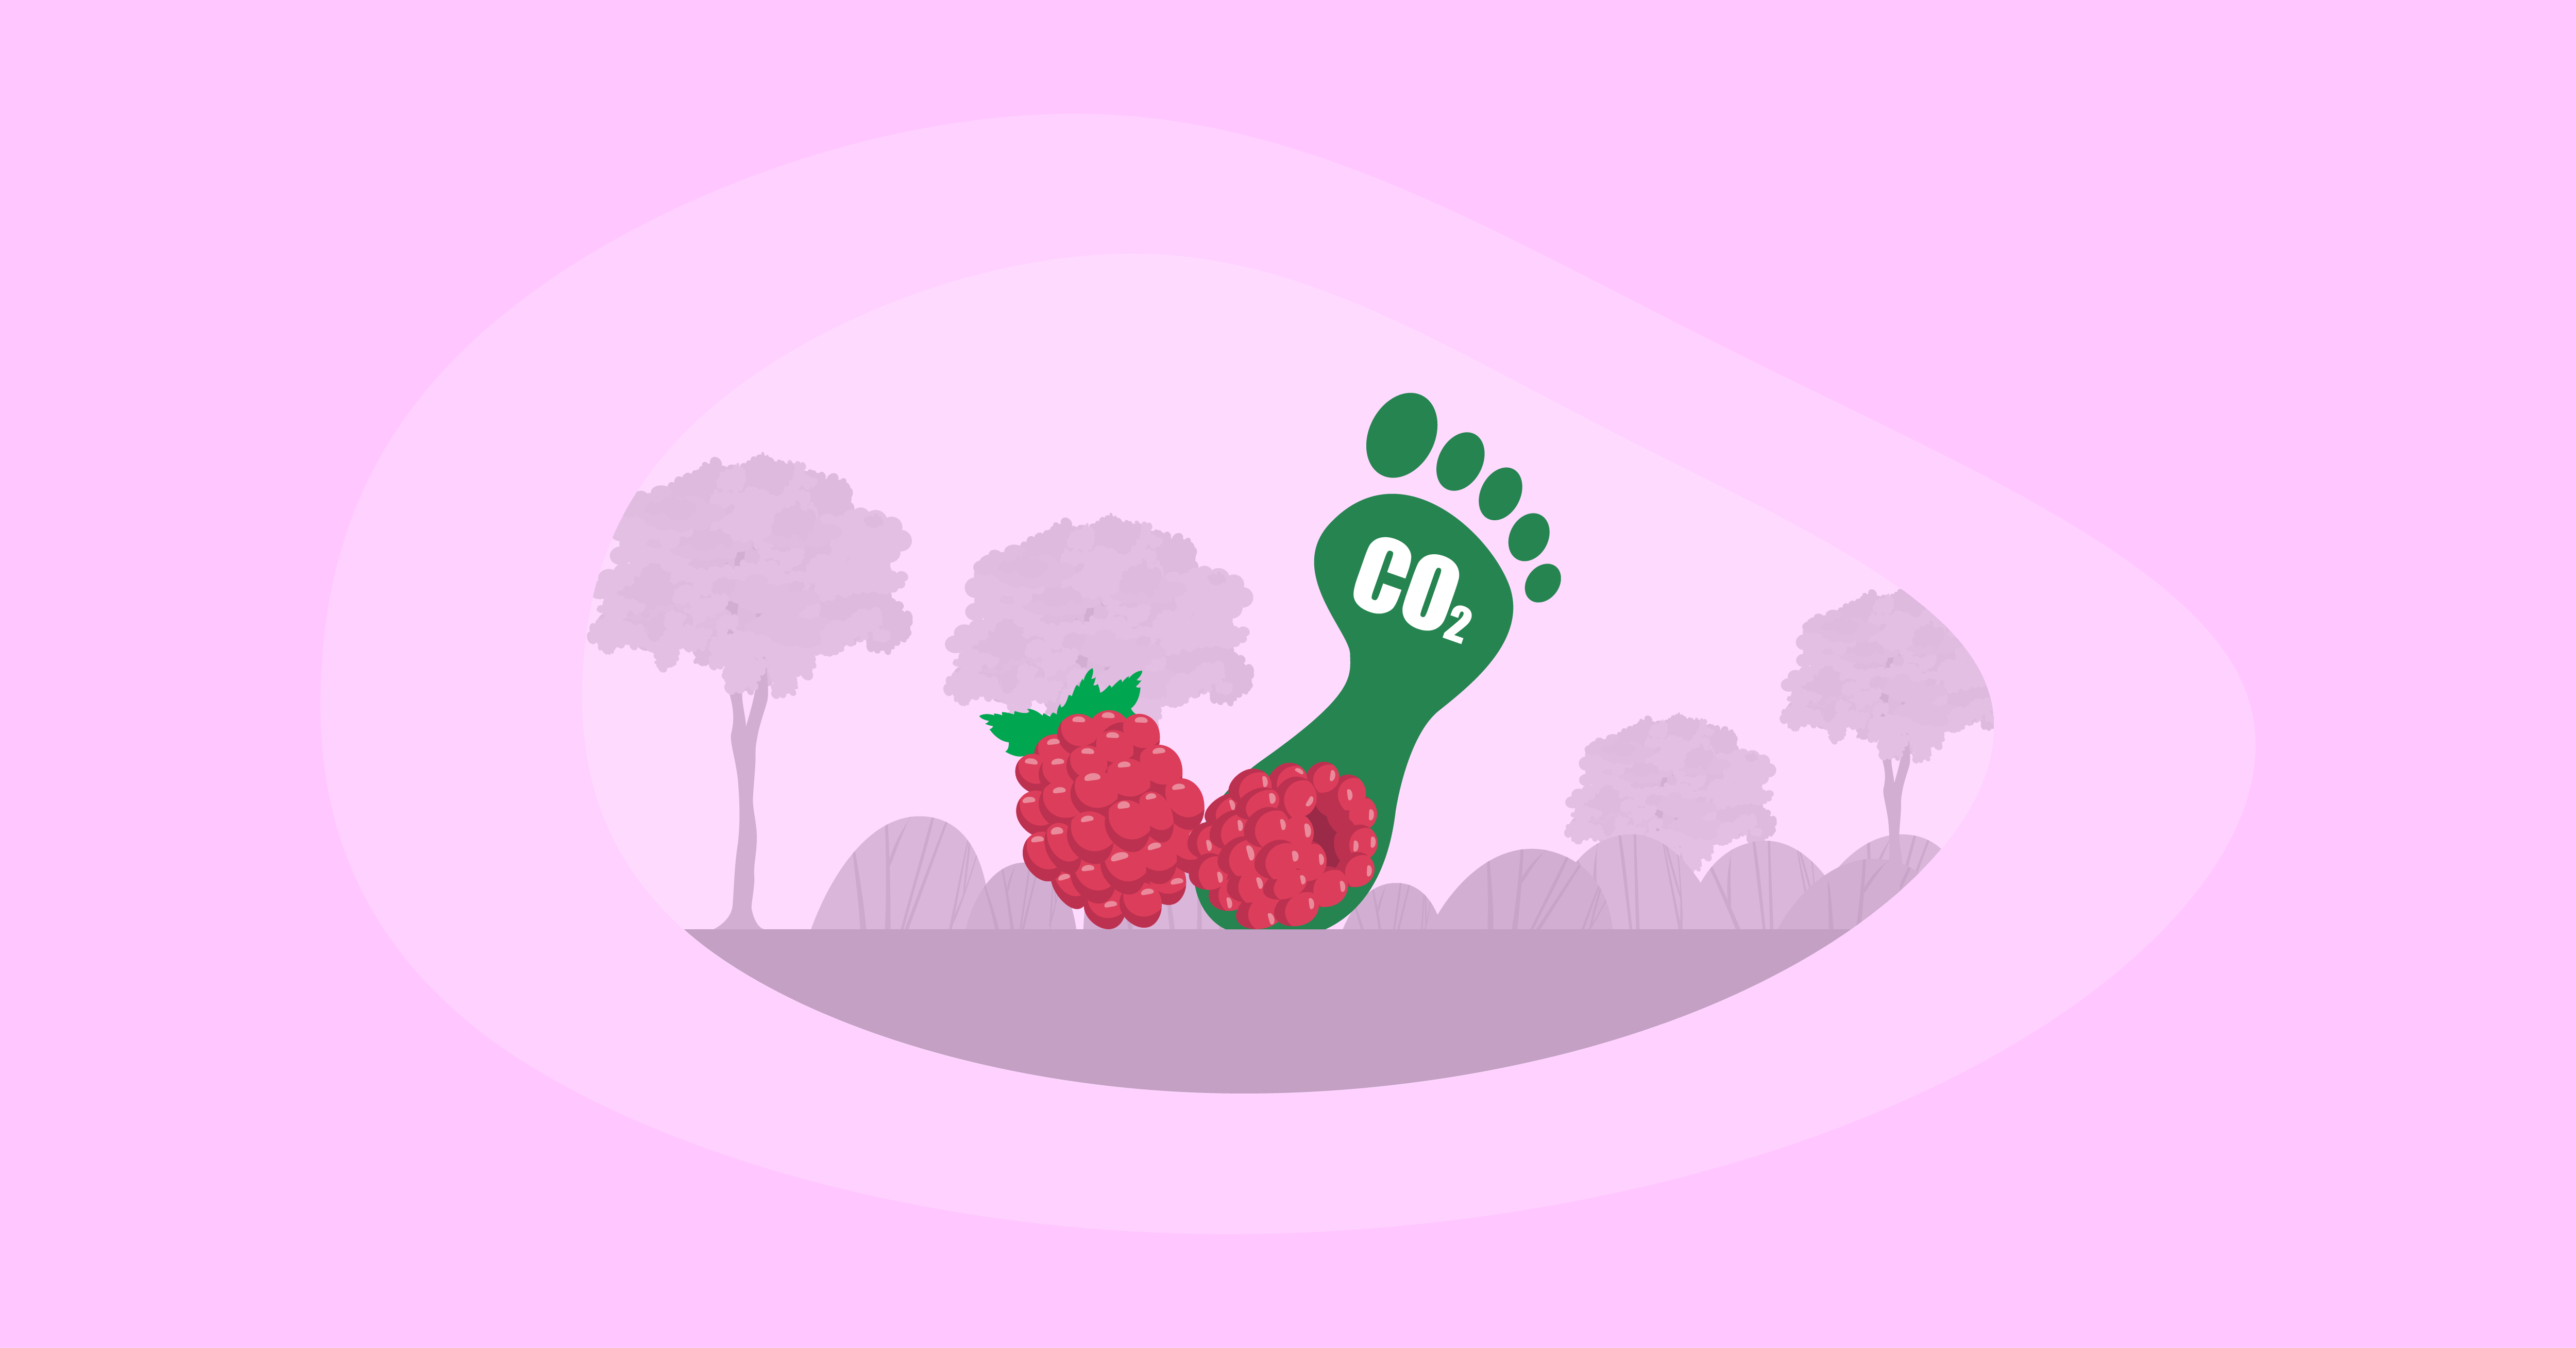 Attempted illustration of raspberries with their carbon footprint